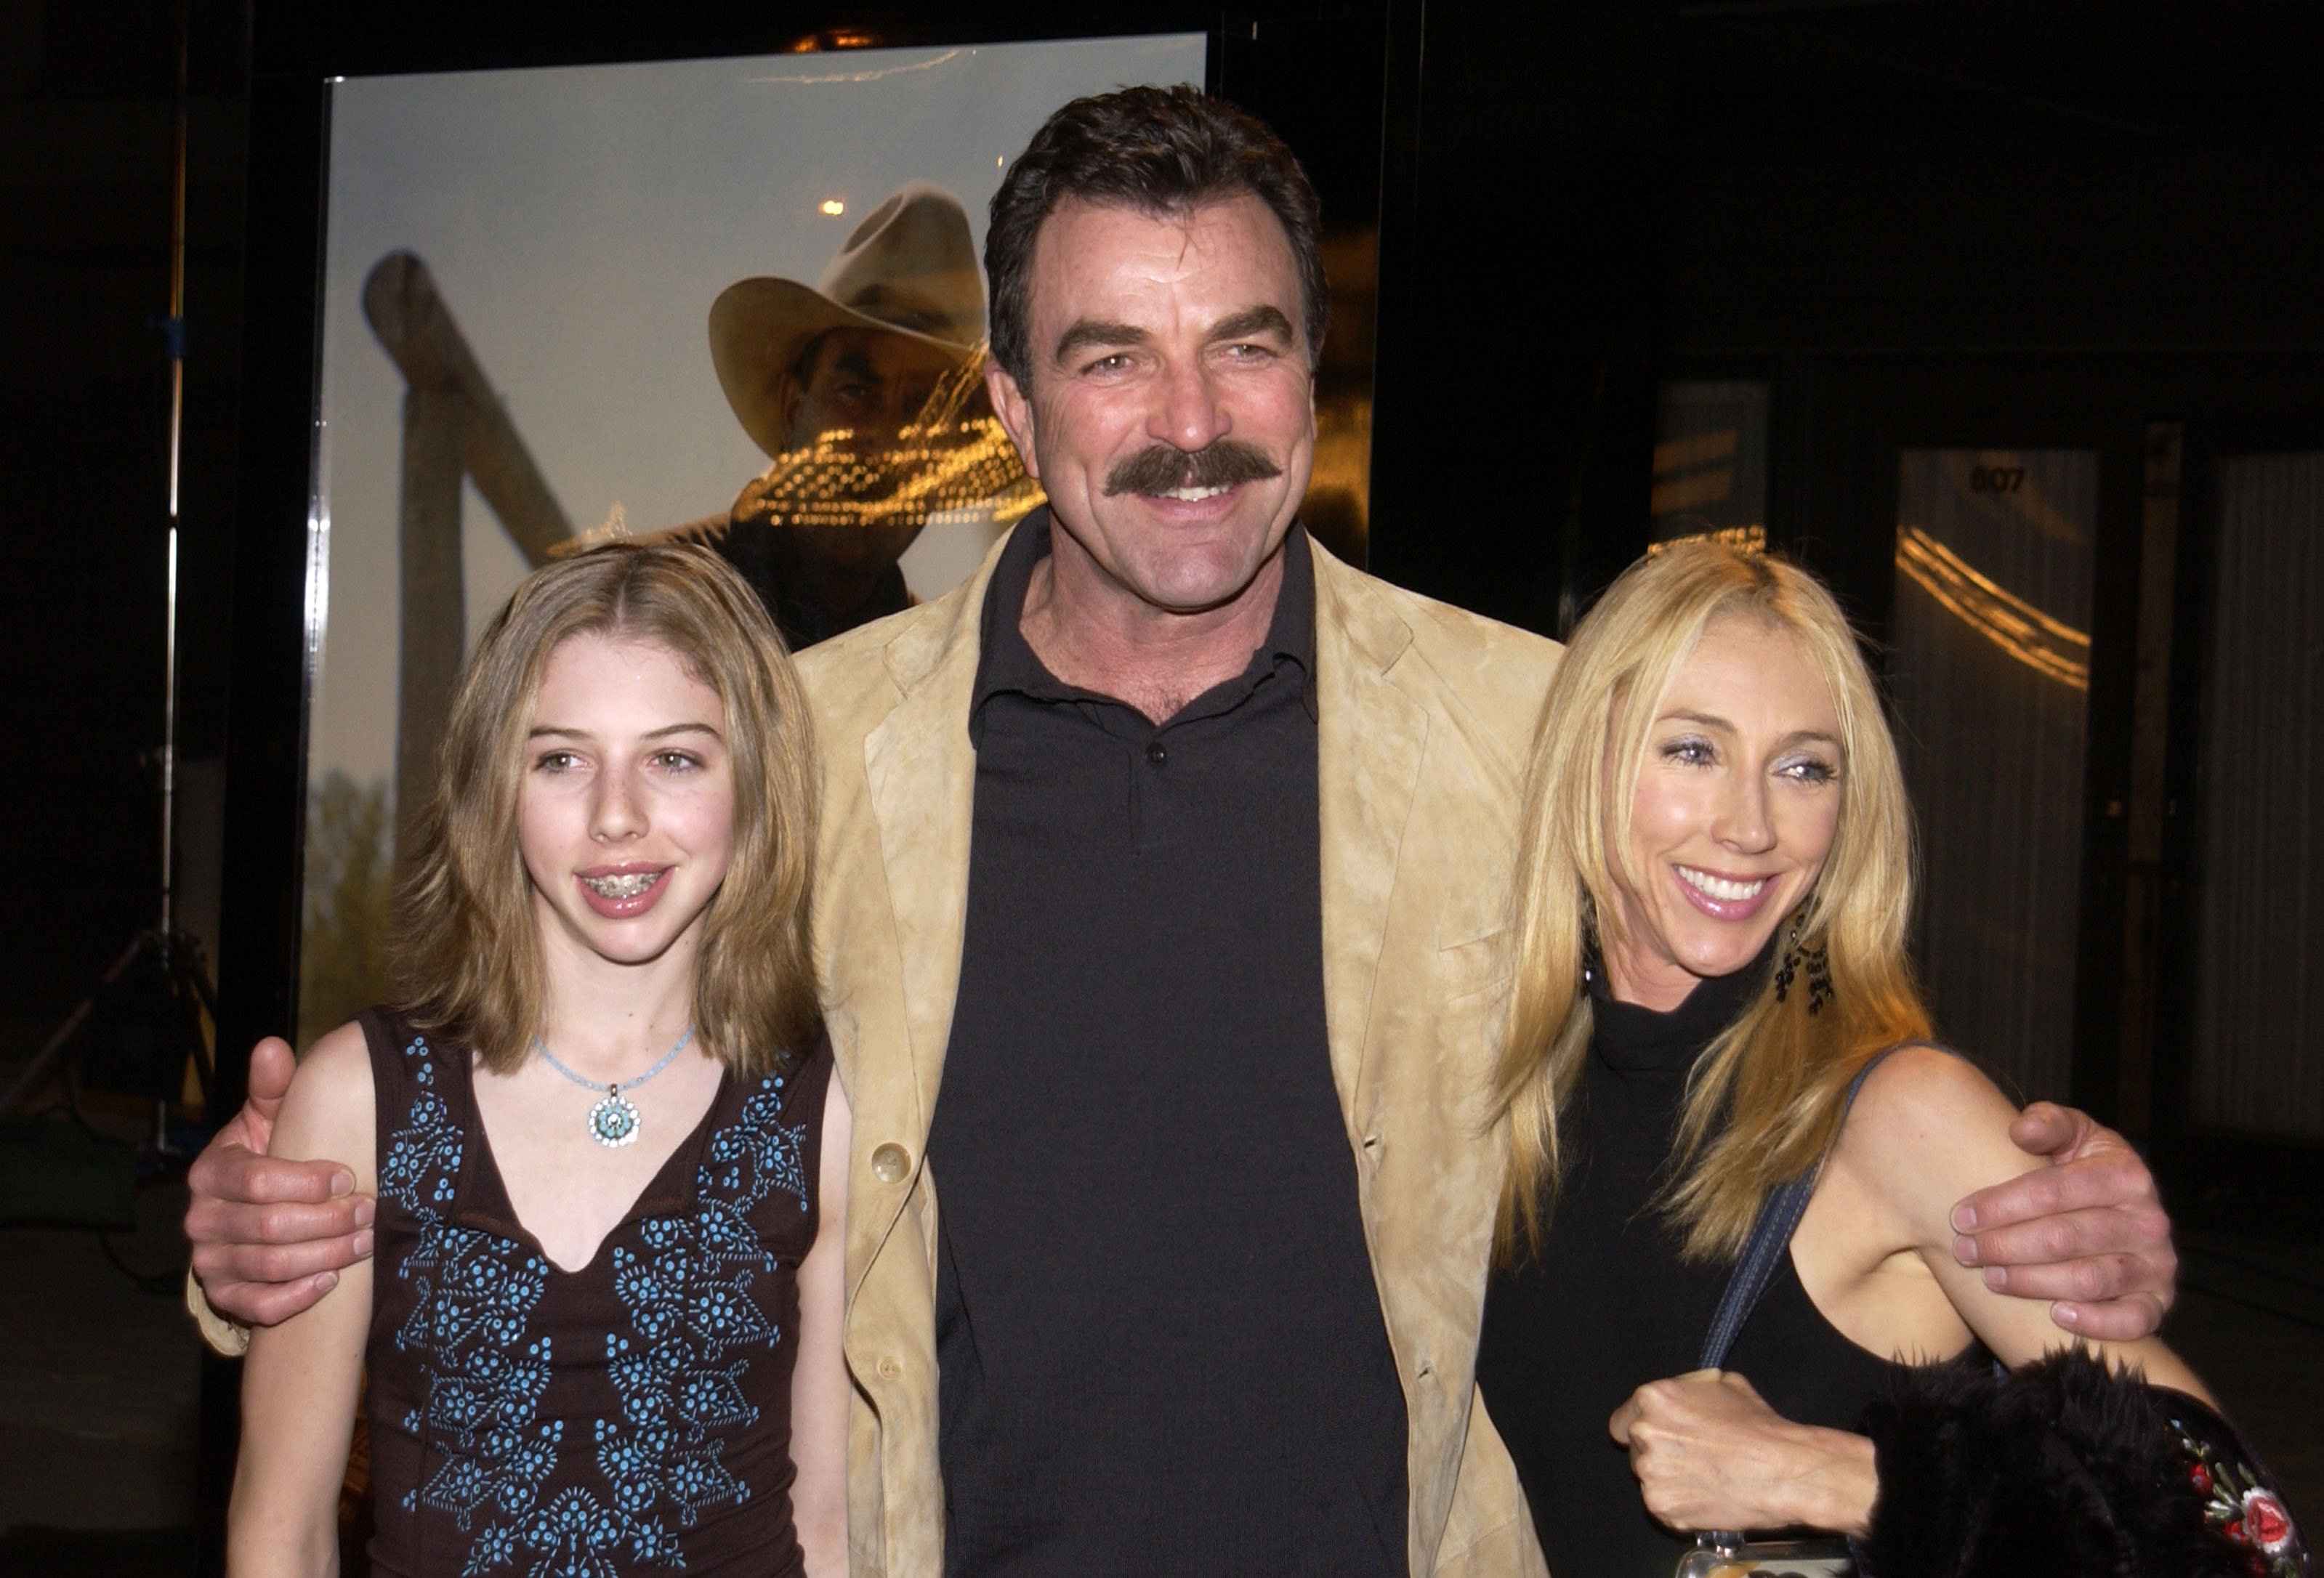 Tom Selleck, wife Jillie Mack and daughter Hannah attend TNT's "Monte Walsh" Premiere January 8, 2003 | Source: Getty Images